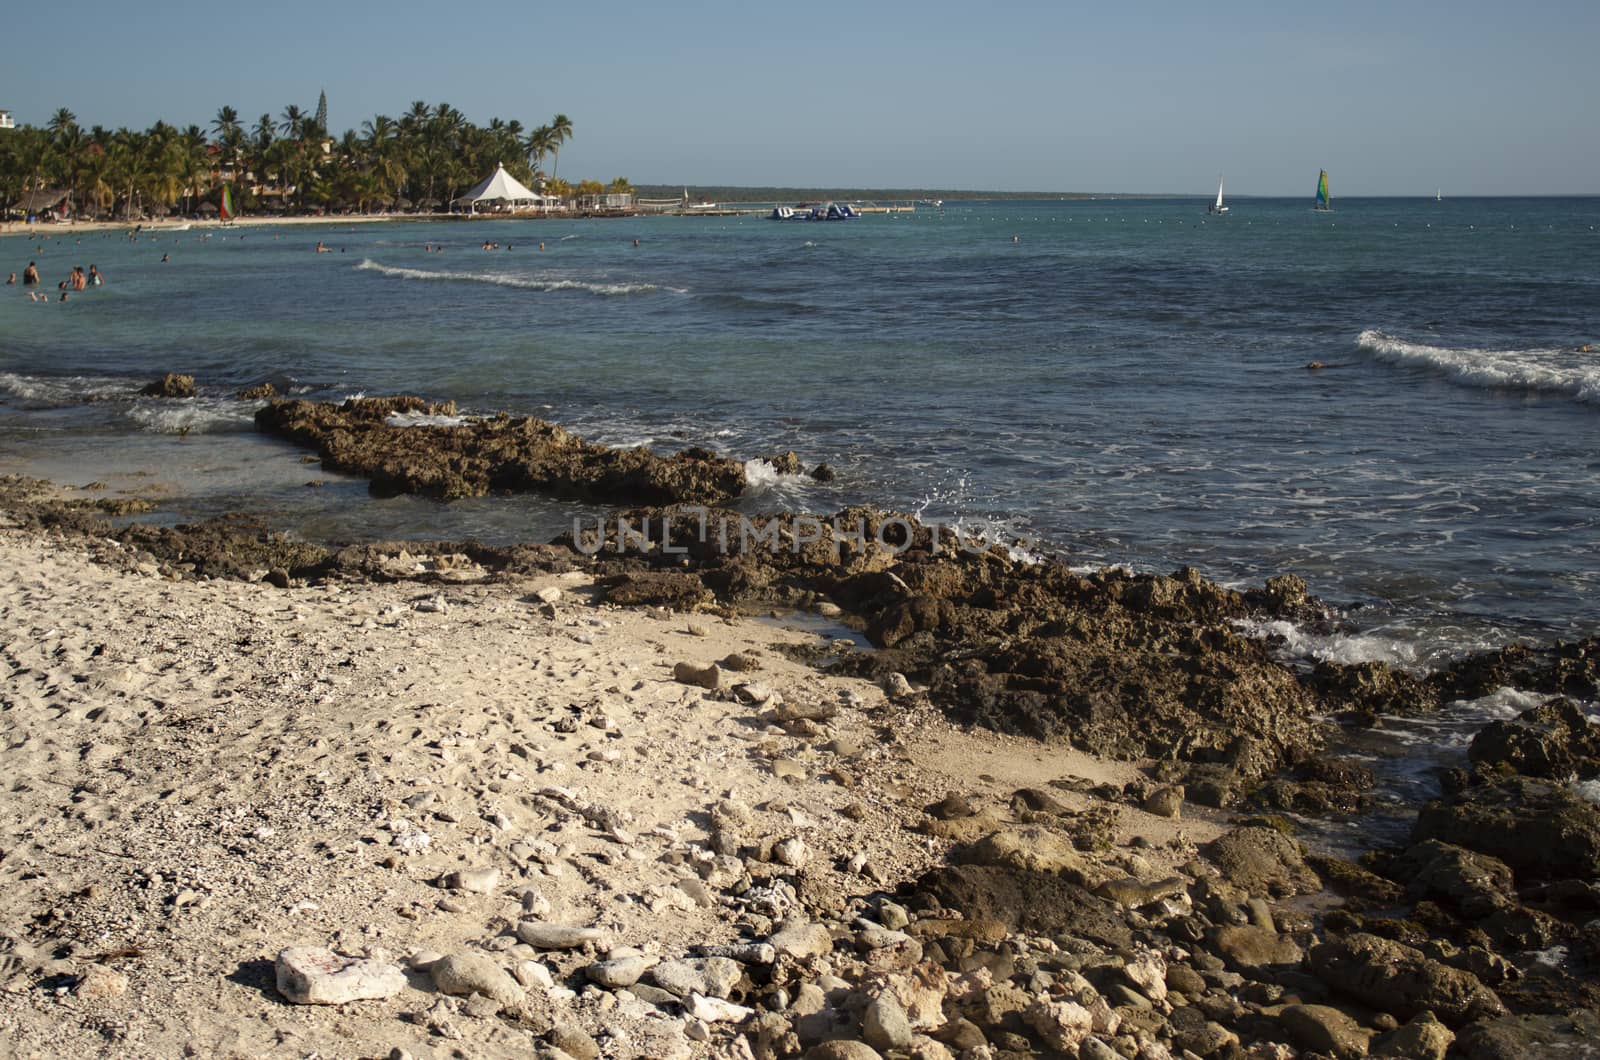 View of the Dominicus coast 6 by pippocarlot